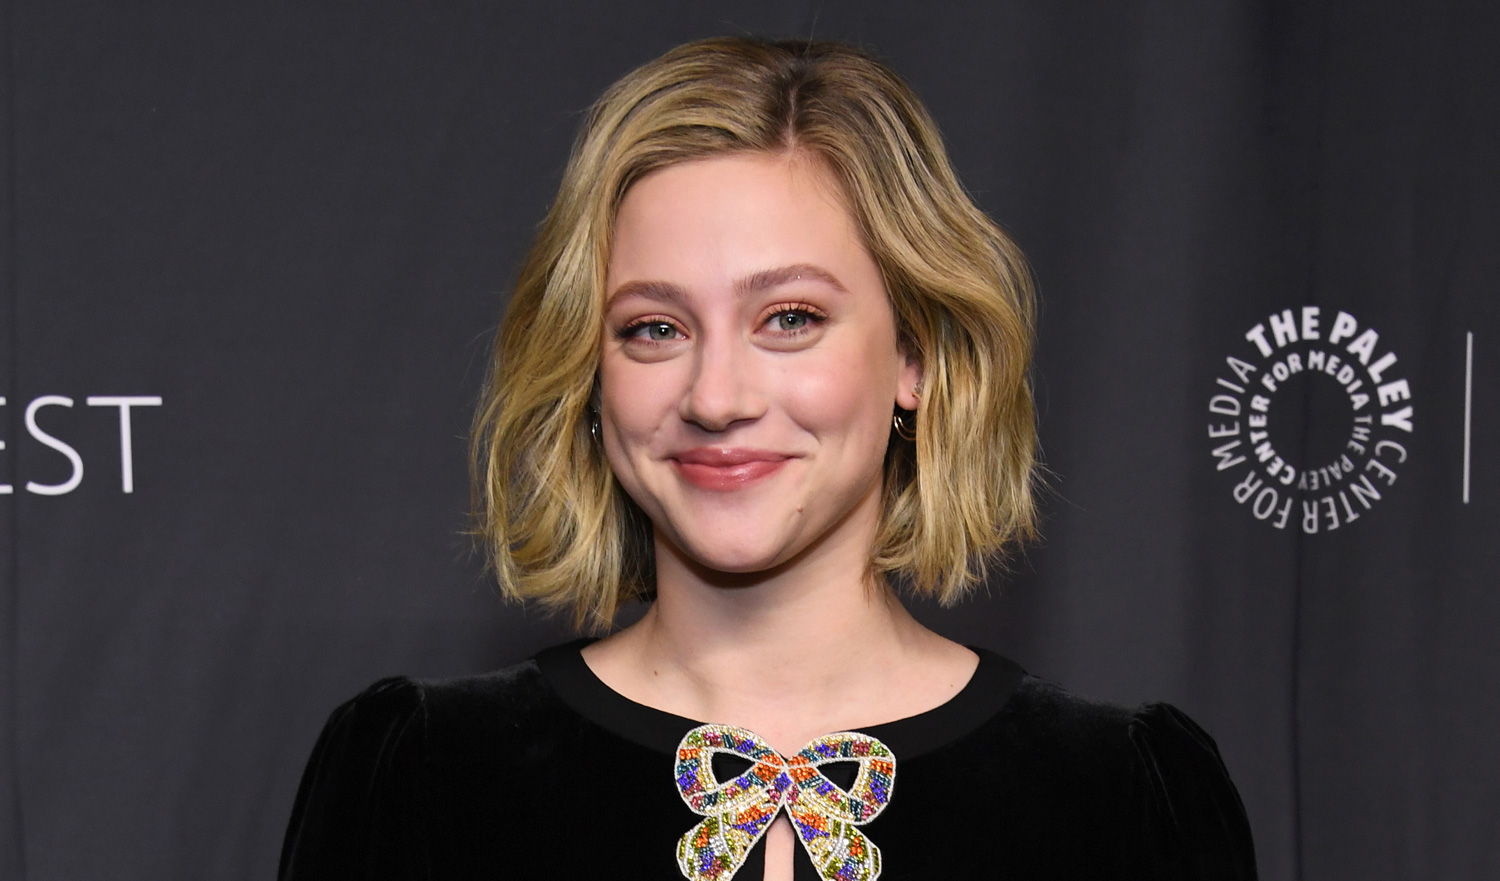 Lili Reinhart’s Next Movie Has a New Title & Release Date